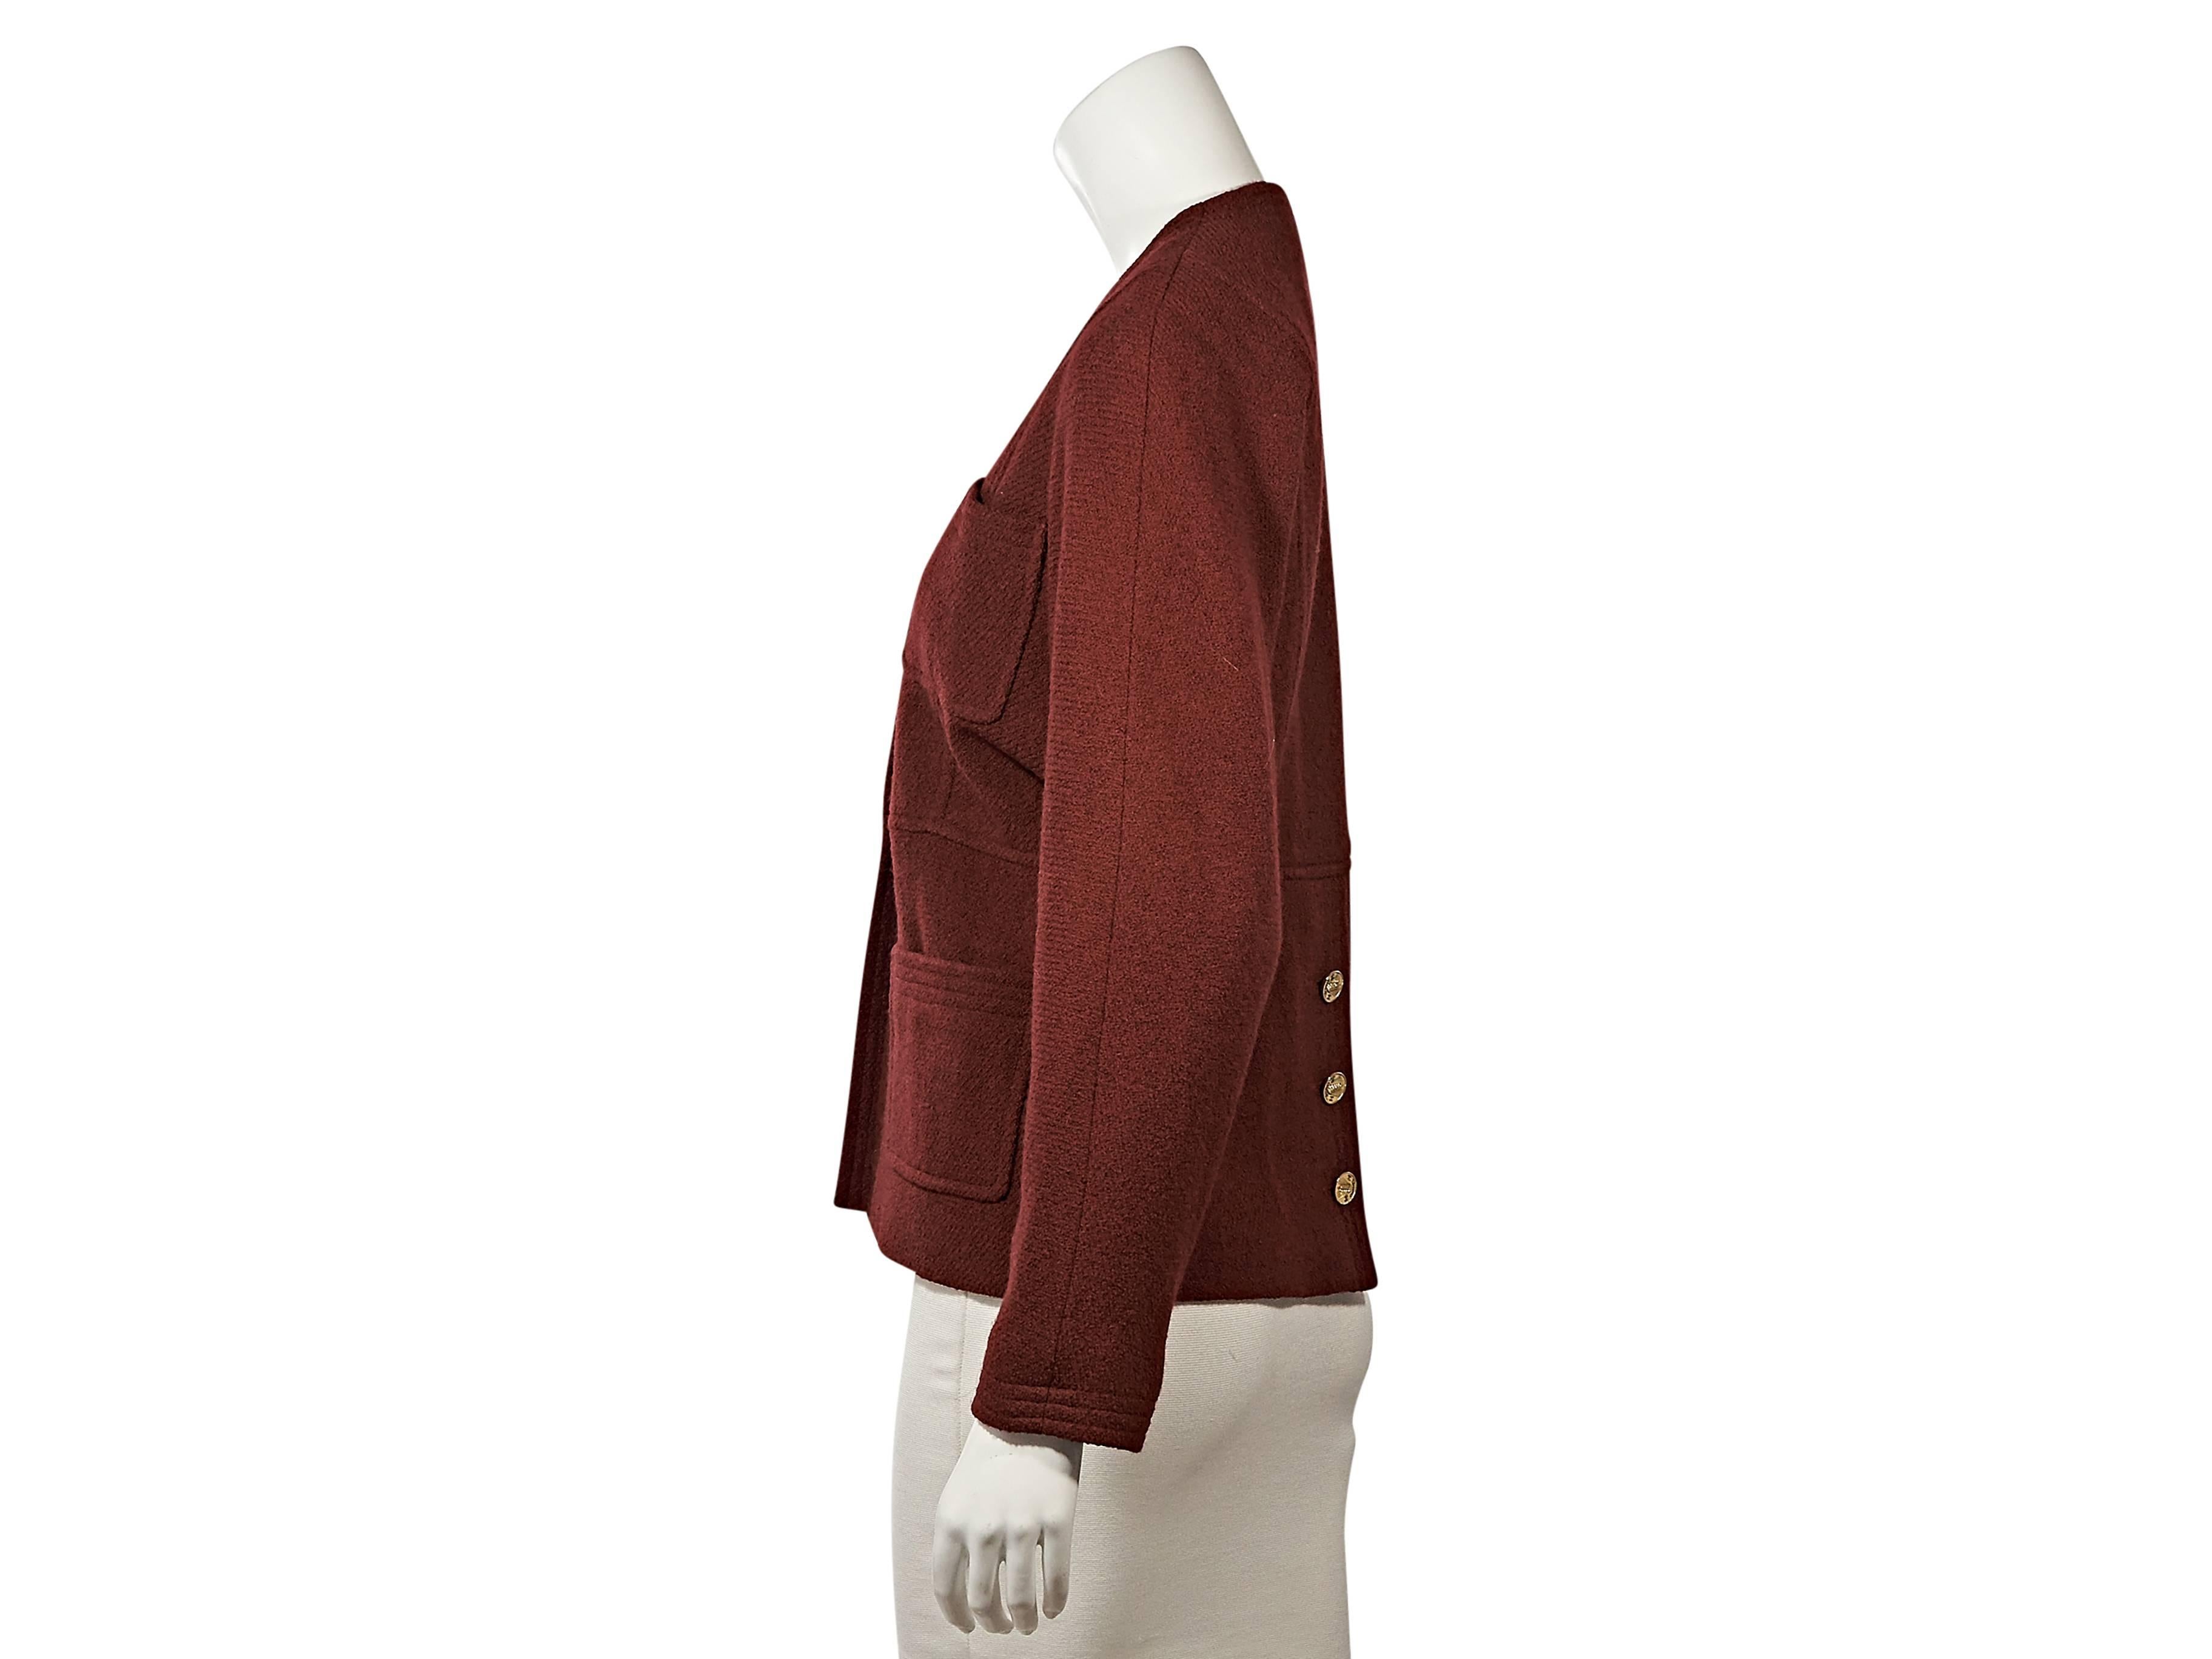 Product details:  Vintage red jacket by Chanel.  Crewneck.  Long sleeves.  Three-button detail at cuffs.  Concealed front closure.  Four front patch pockets.  Triple button back hem vent. 
Condition: ﻿Very good